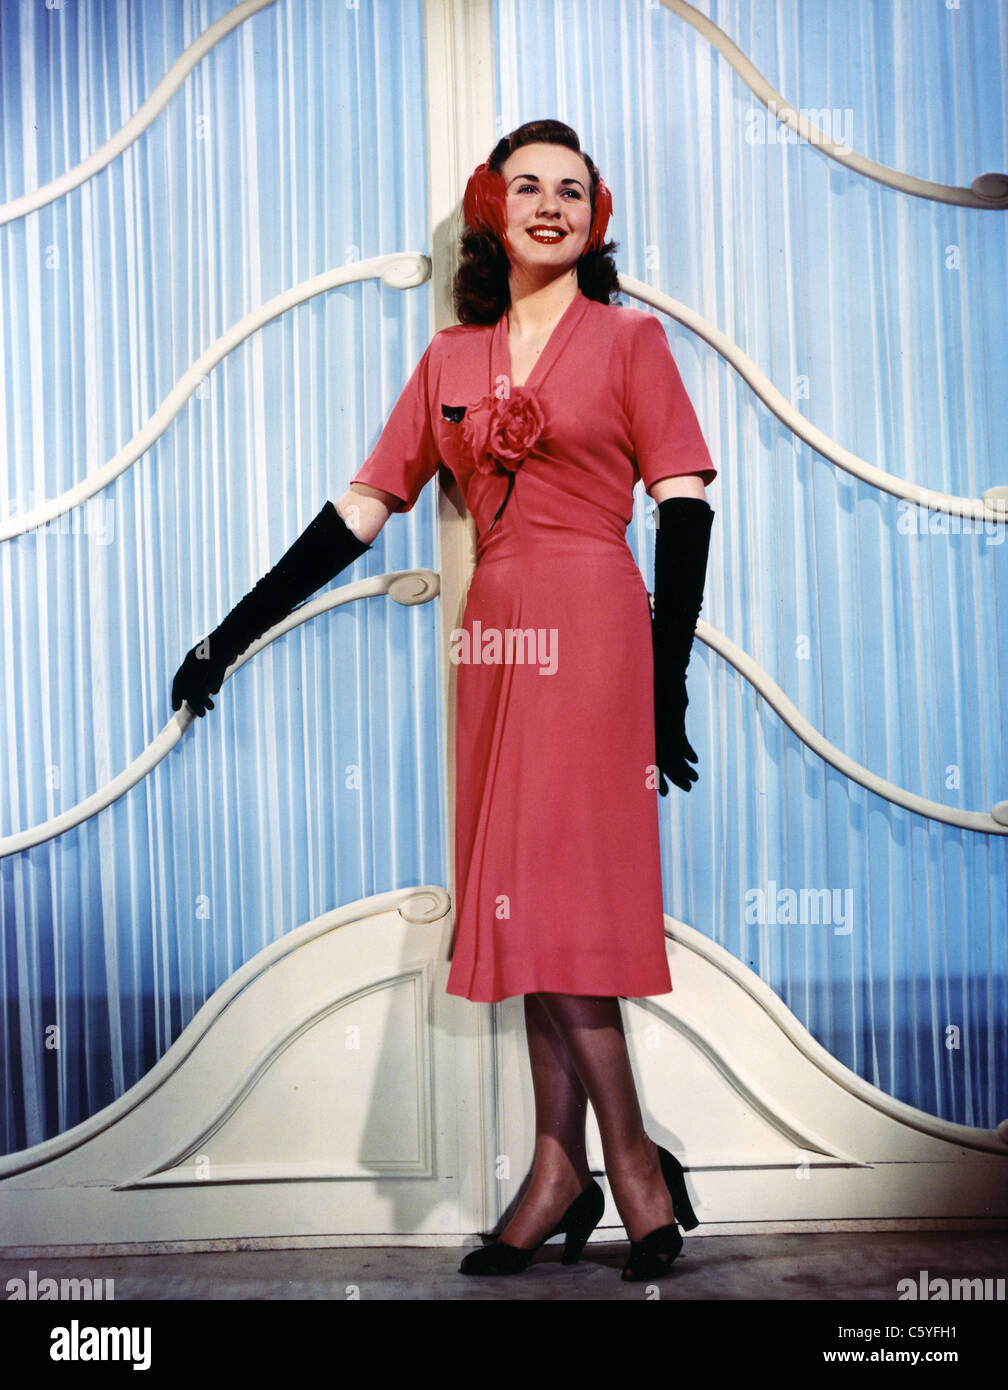 DEANNA DURBIN  Canadian-American singer and film actress about 1945 Stock Photo